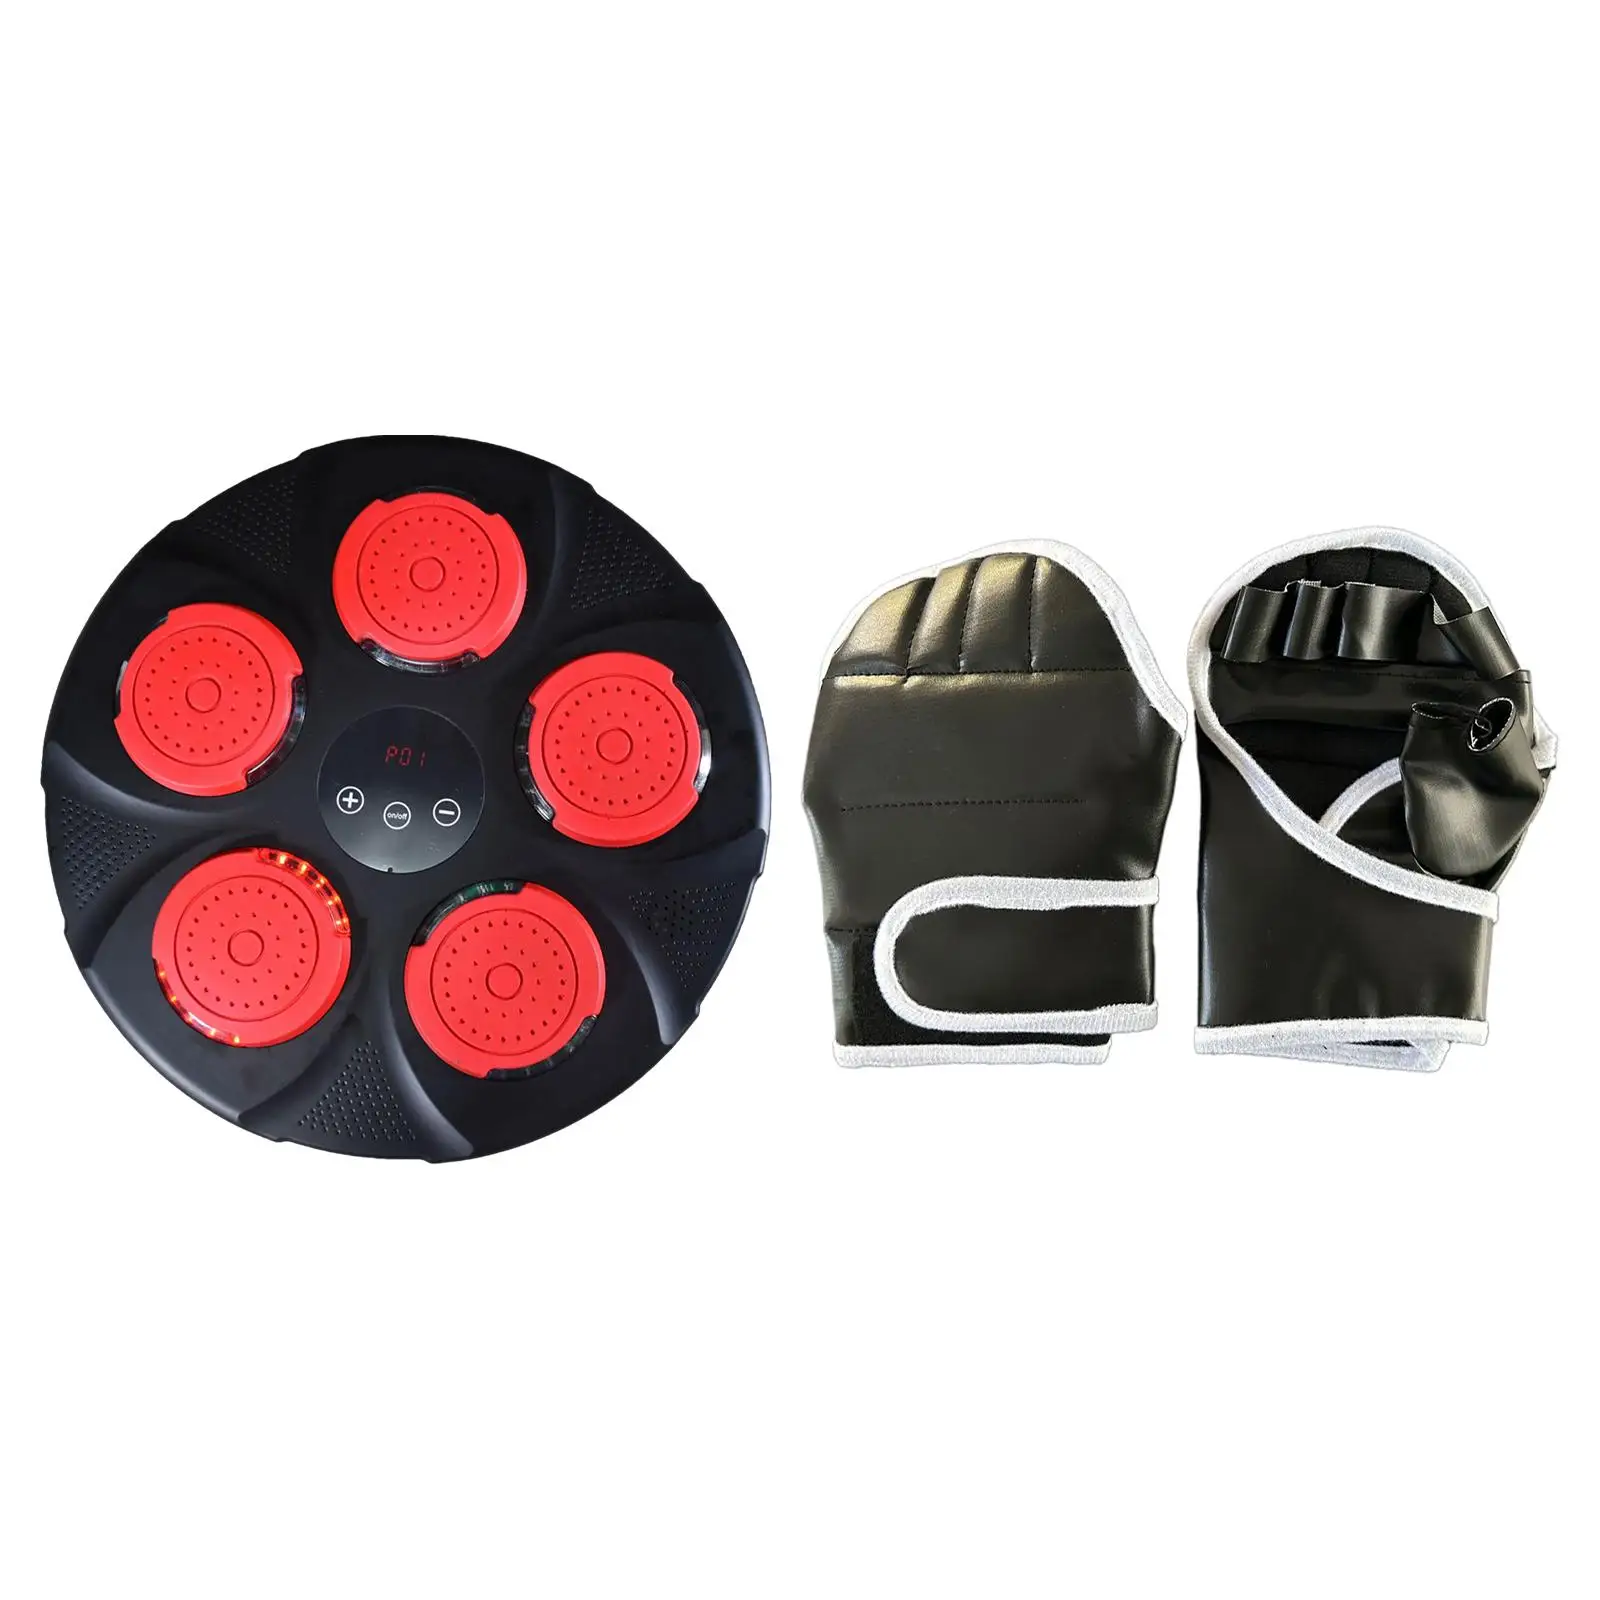 Music Boxing Machine Electronic Boxing Target Musical Boxing Plate for Fitness Improves Agility Workout Practice